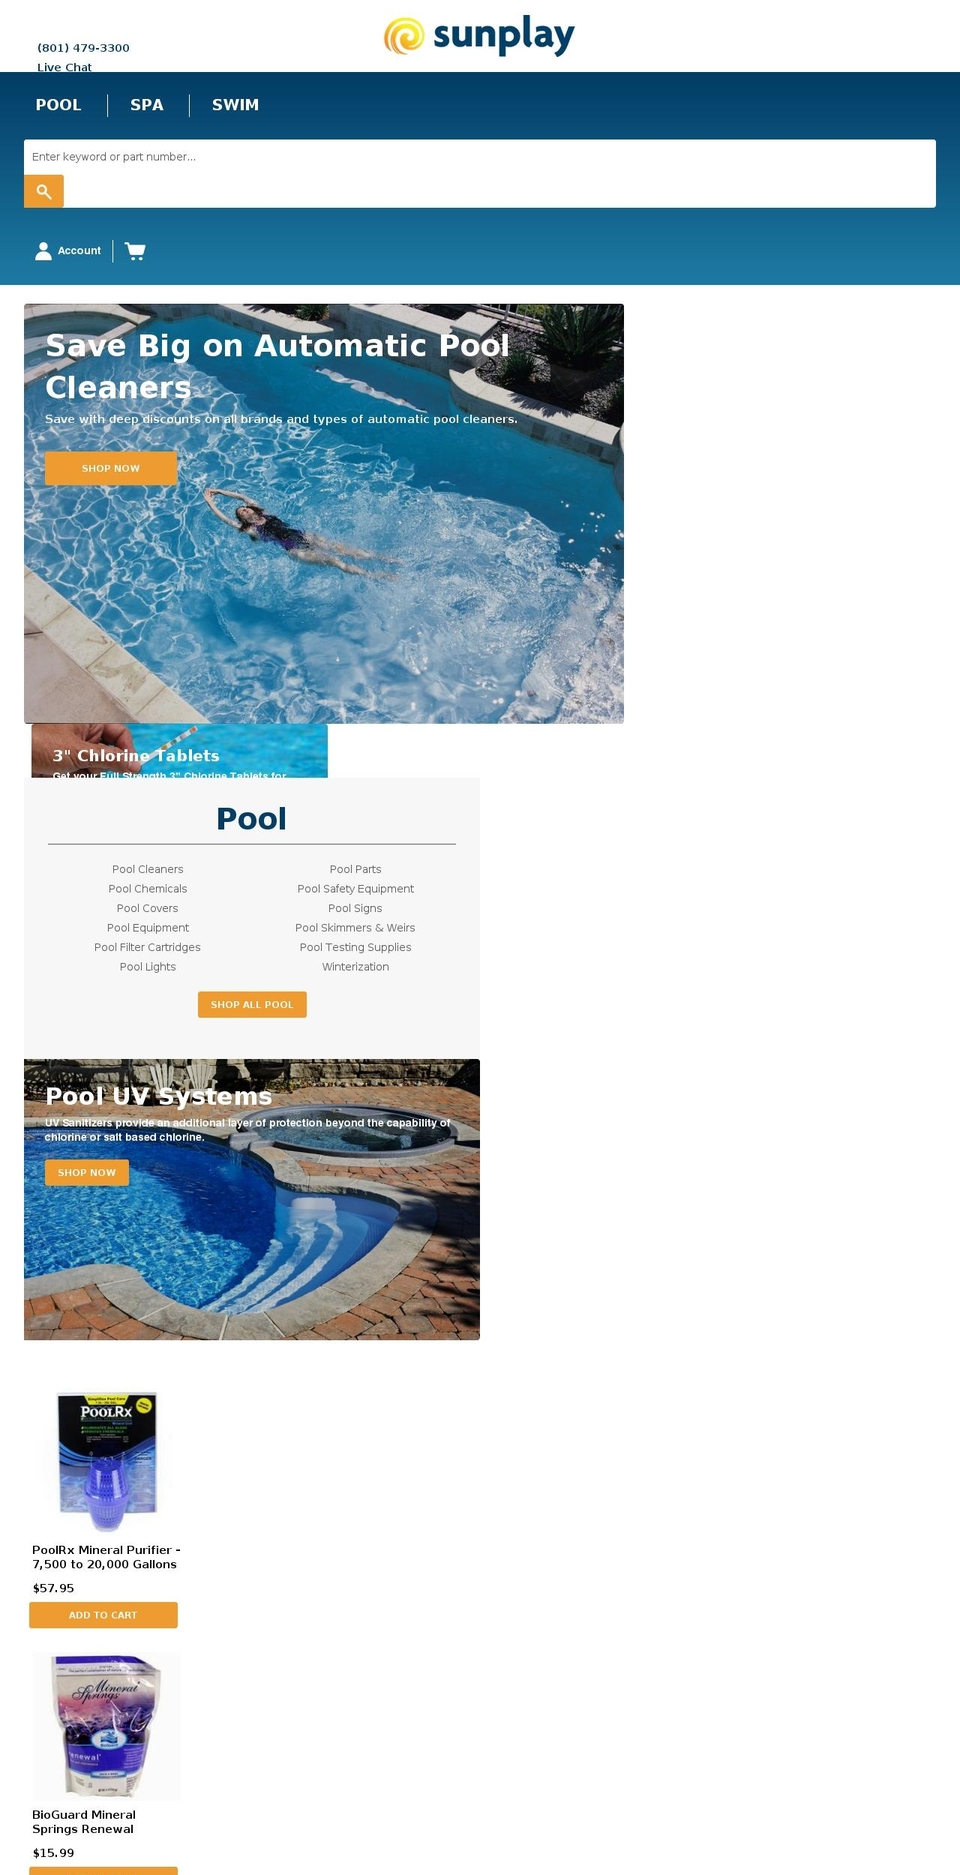 Sunplay v1.0 [Speck - Collection] Shopify theme site example poolutah.com